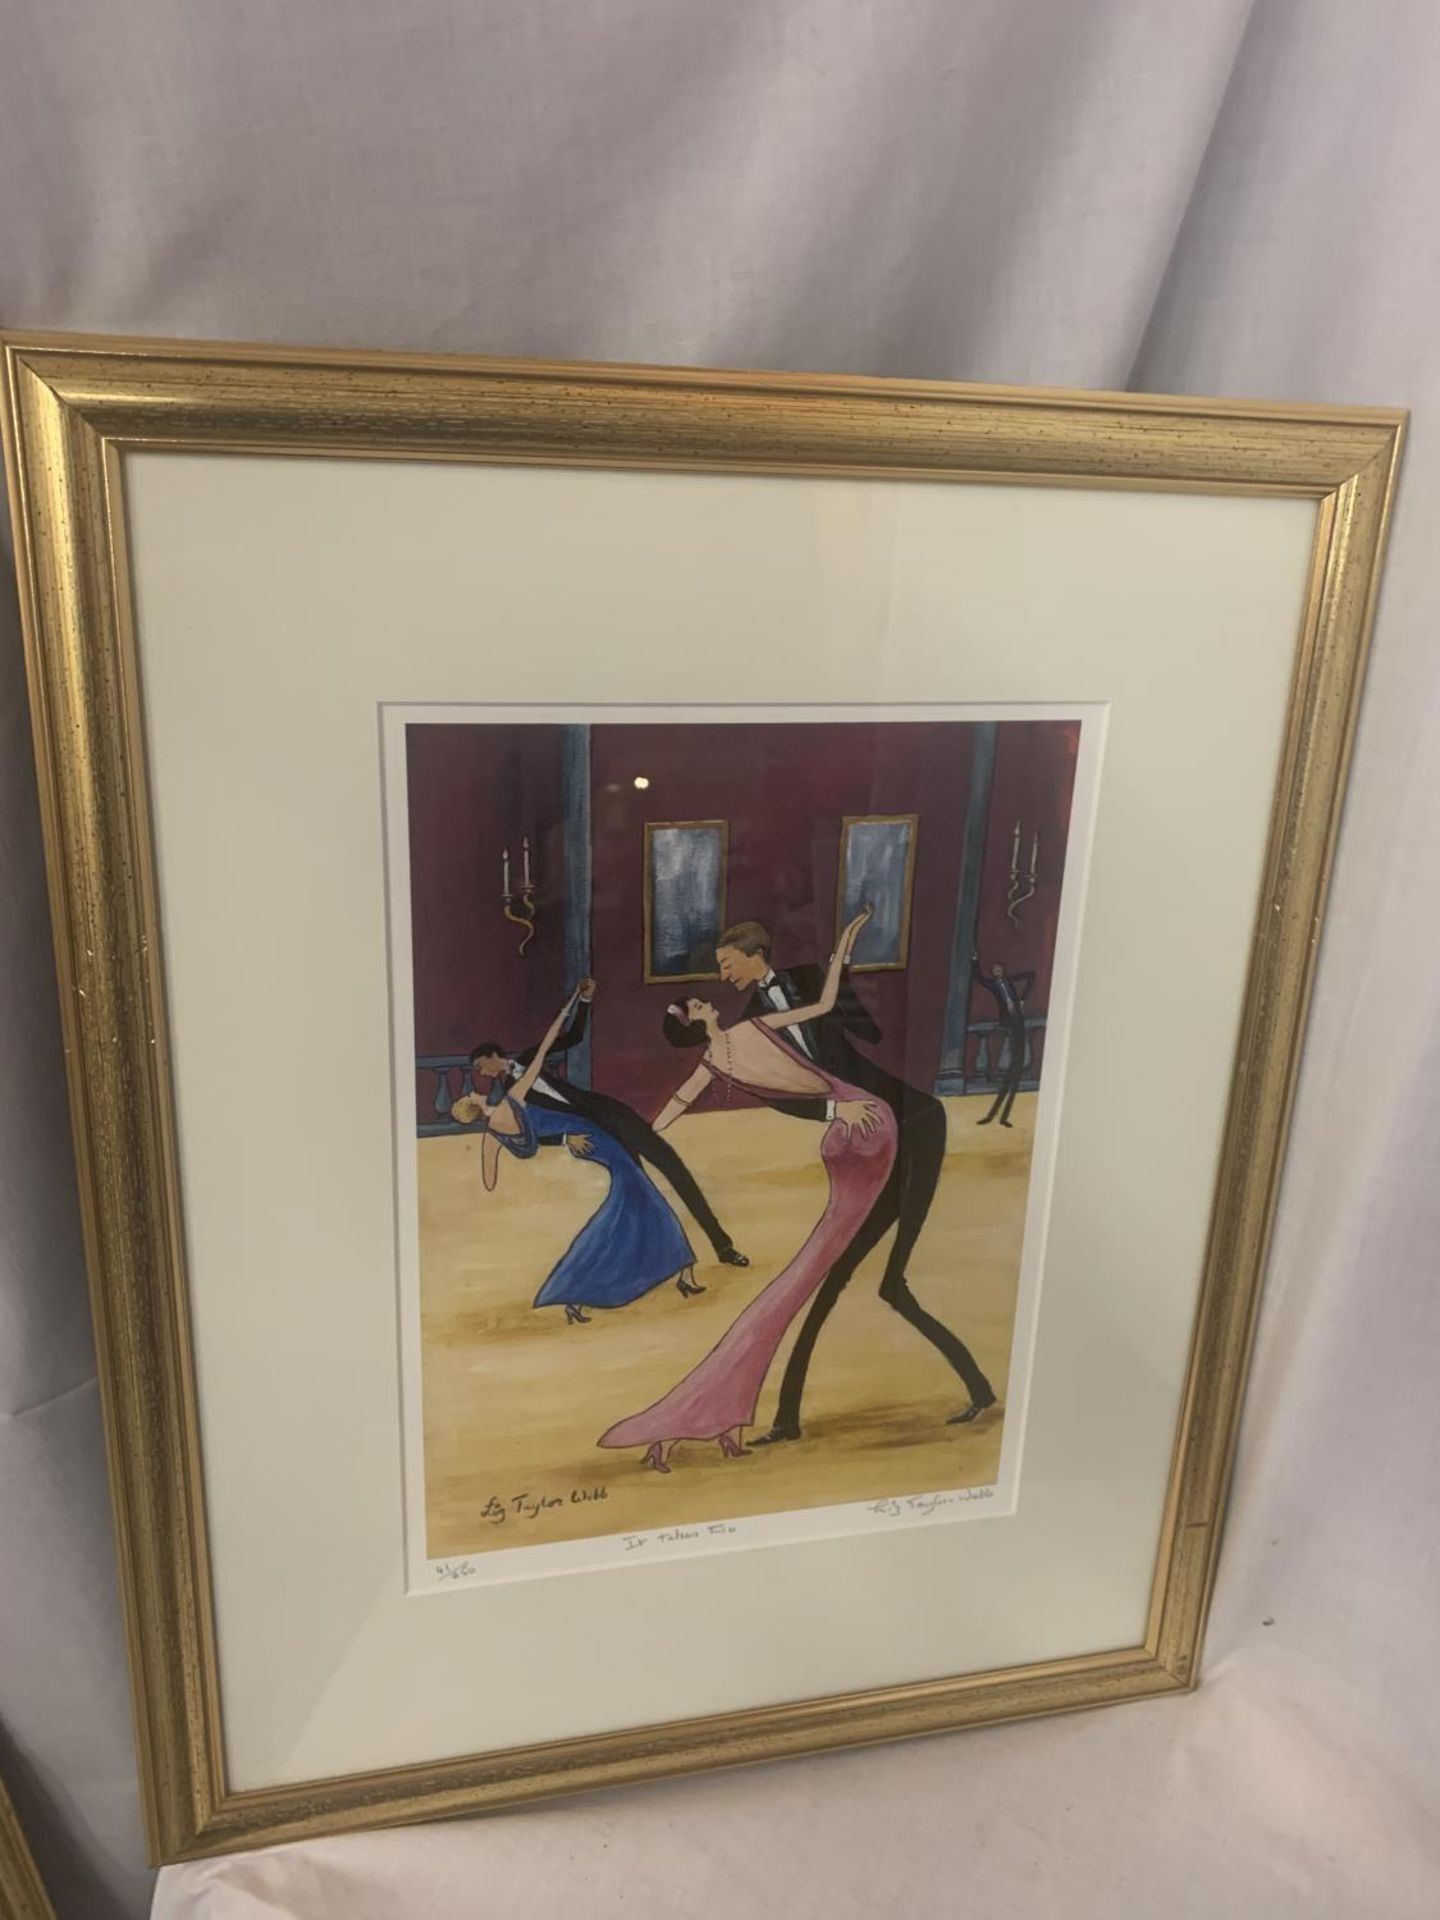 A GILT FRAMED LIMITED EDITION LIZ TAYLOR WEBB PICTURE 'IT TAKE TWO' PENCIL SIGNED TO LOWER RIGHT